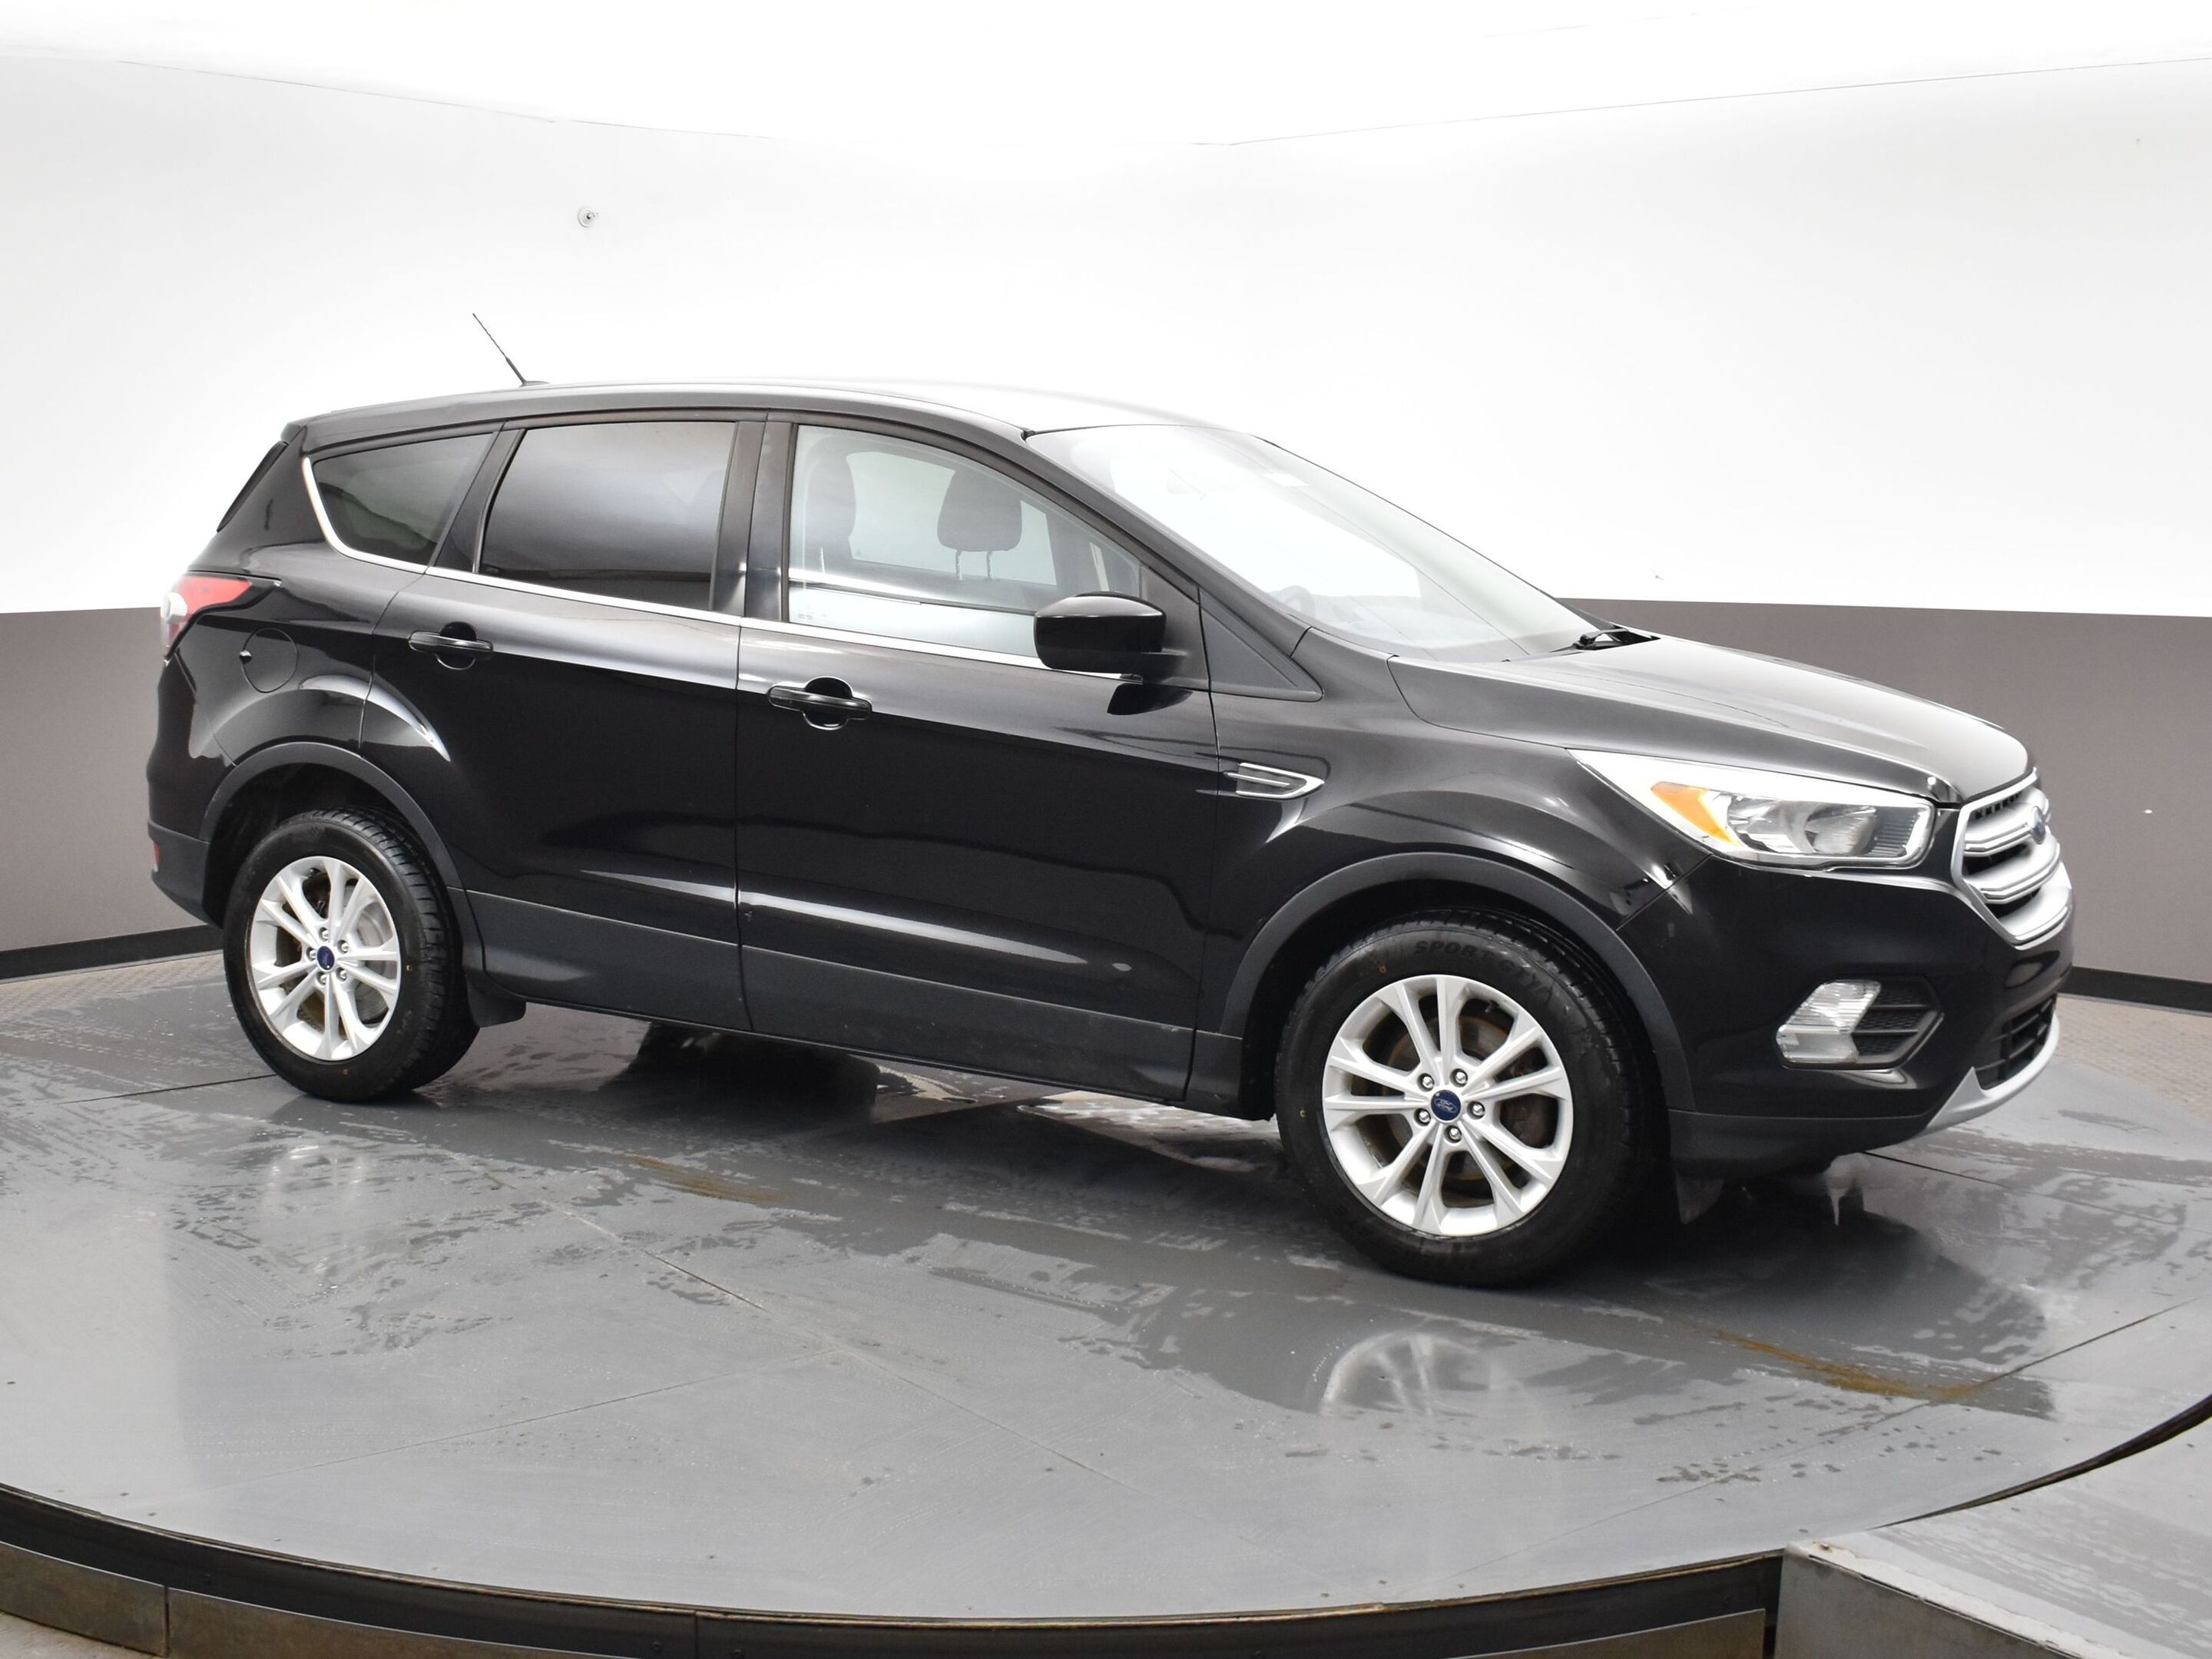 2017 Ford Escape SE FWD Heated Seats, Bluetooth, Back up camera, he